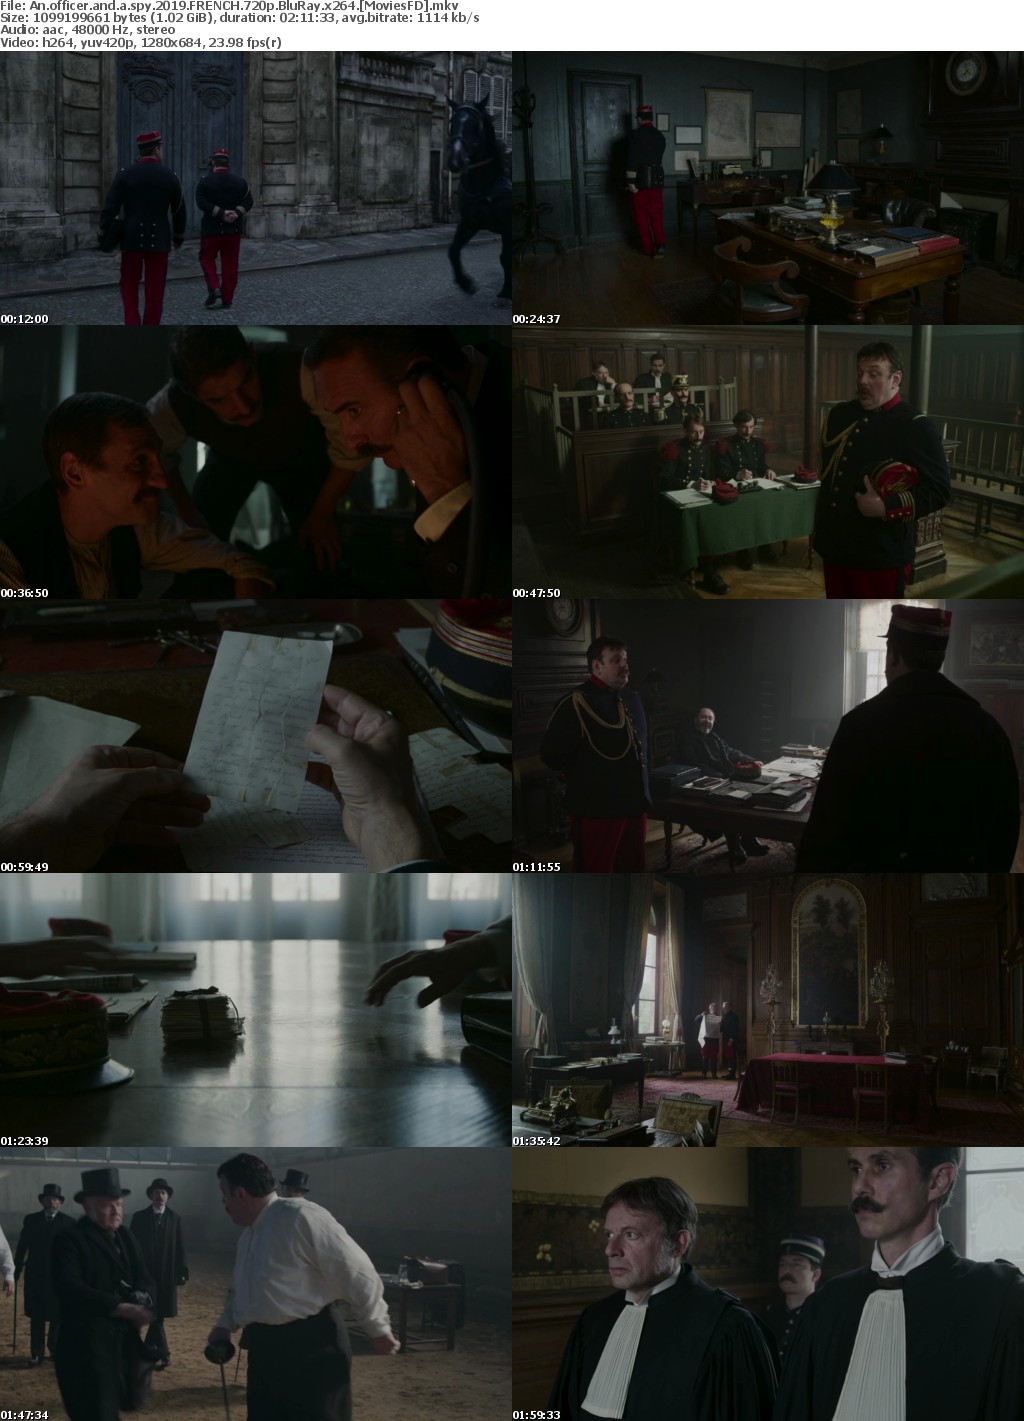 An Officer And A Spy (2019) French 720p BluRay x264 - MoviesFD